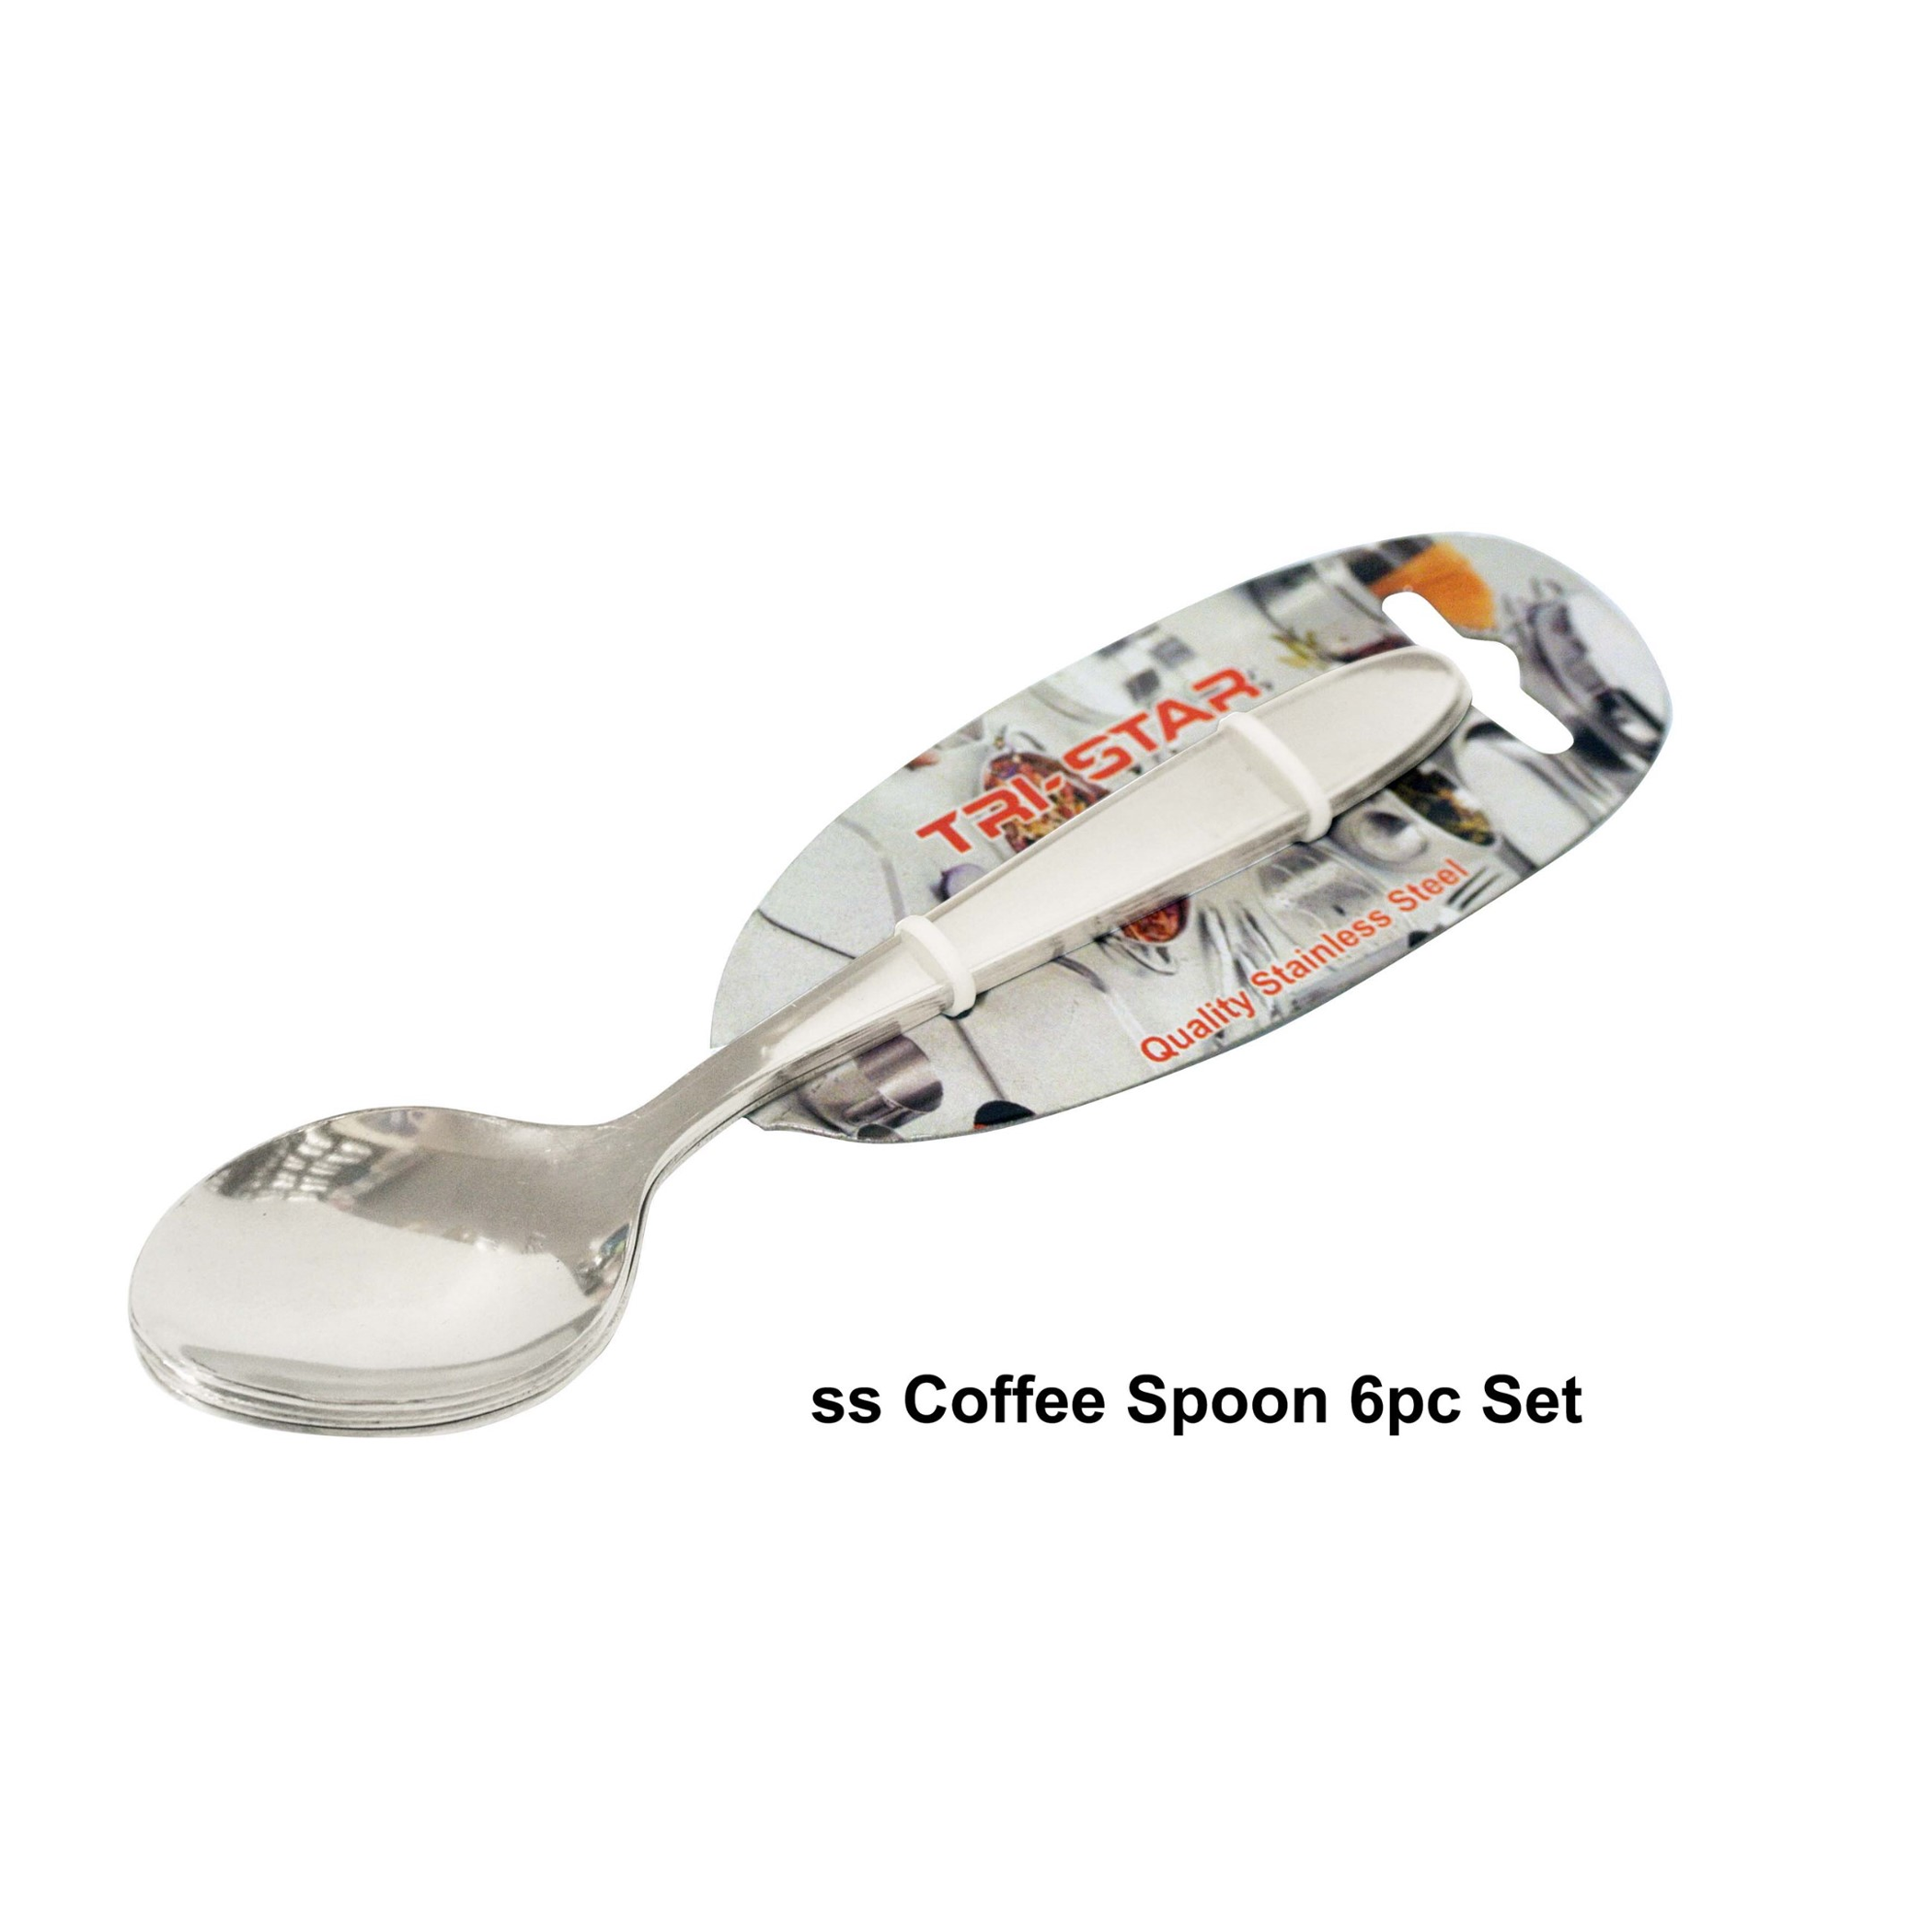 Tri-Star Stainless Steel Coffee Spoon Set 6 Pc